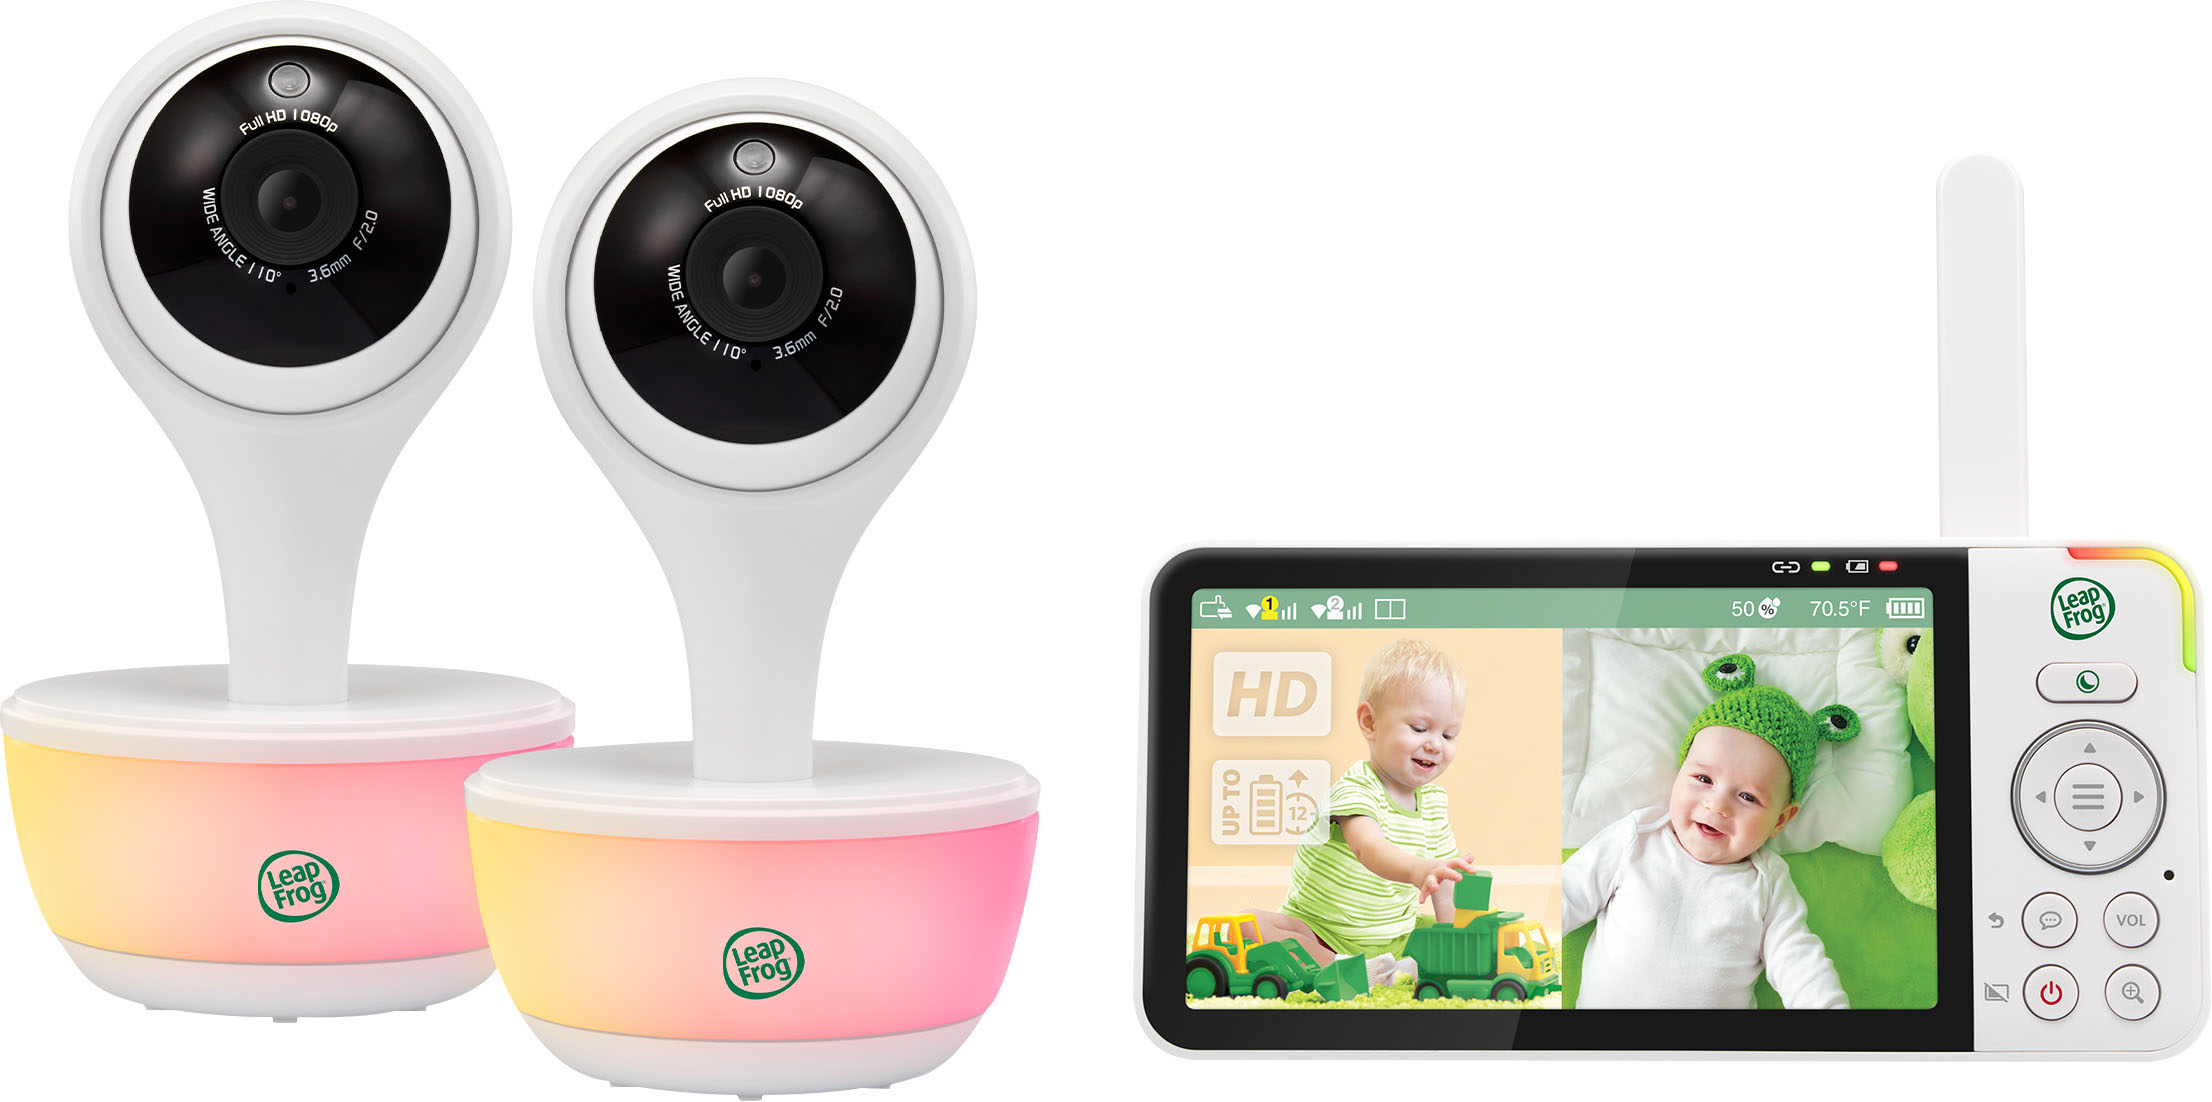 LeapFrog 1080p WiFi Remote Access 2 Camera Video Baby Monitor with